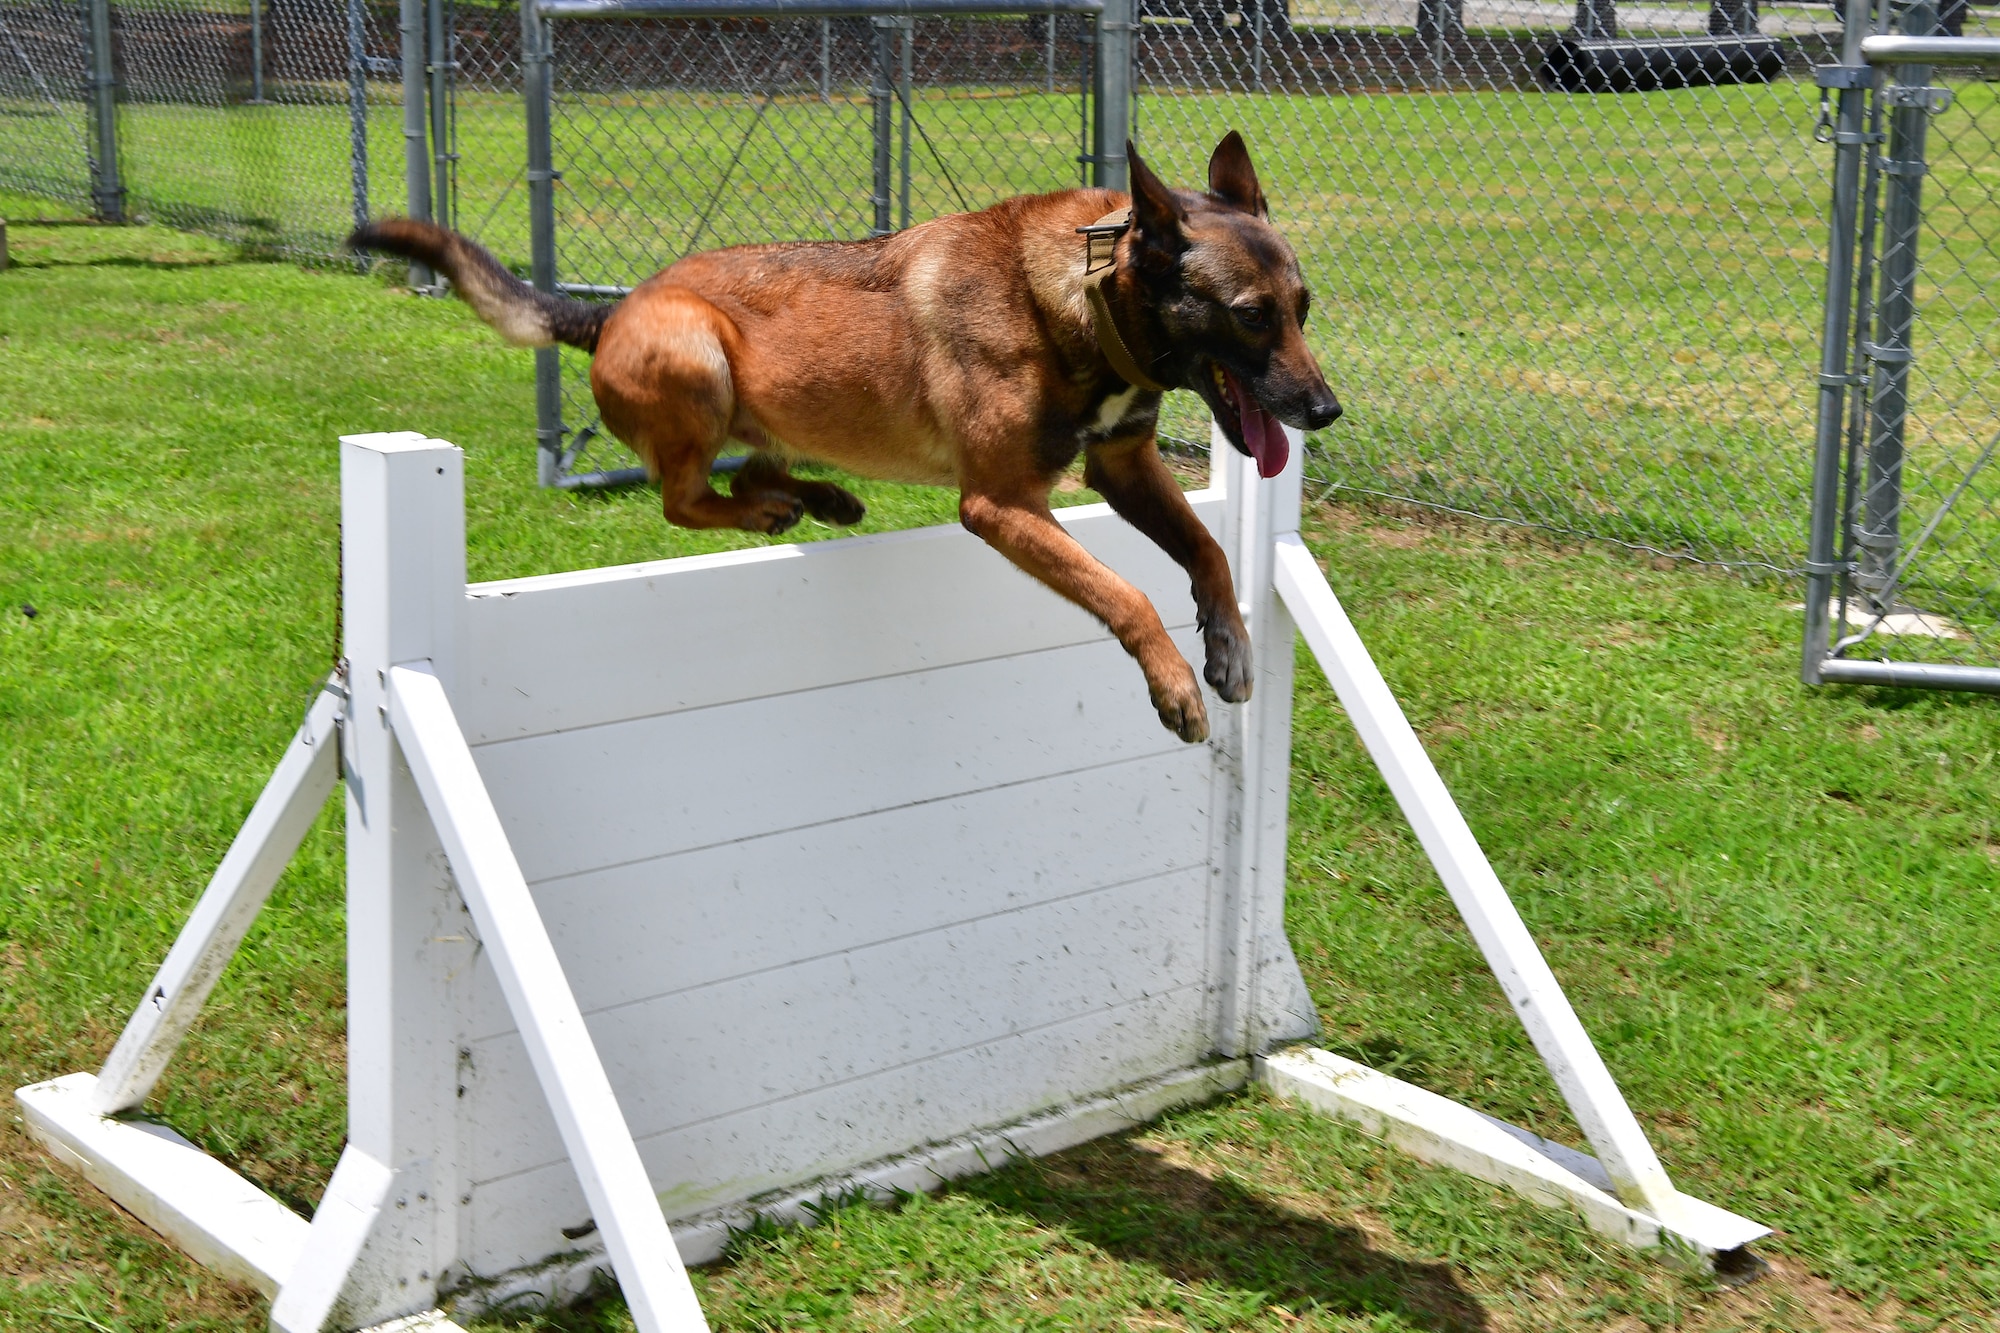 Military Working Dog Alfa, completes the obedience training course at Little Rock Air Force Base.